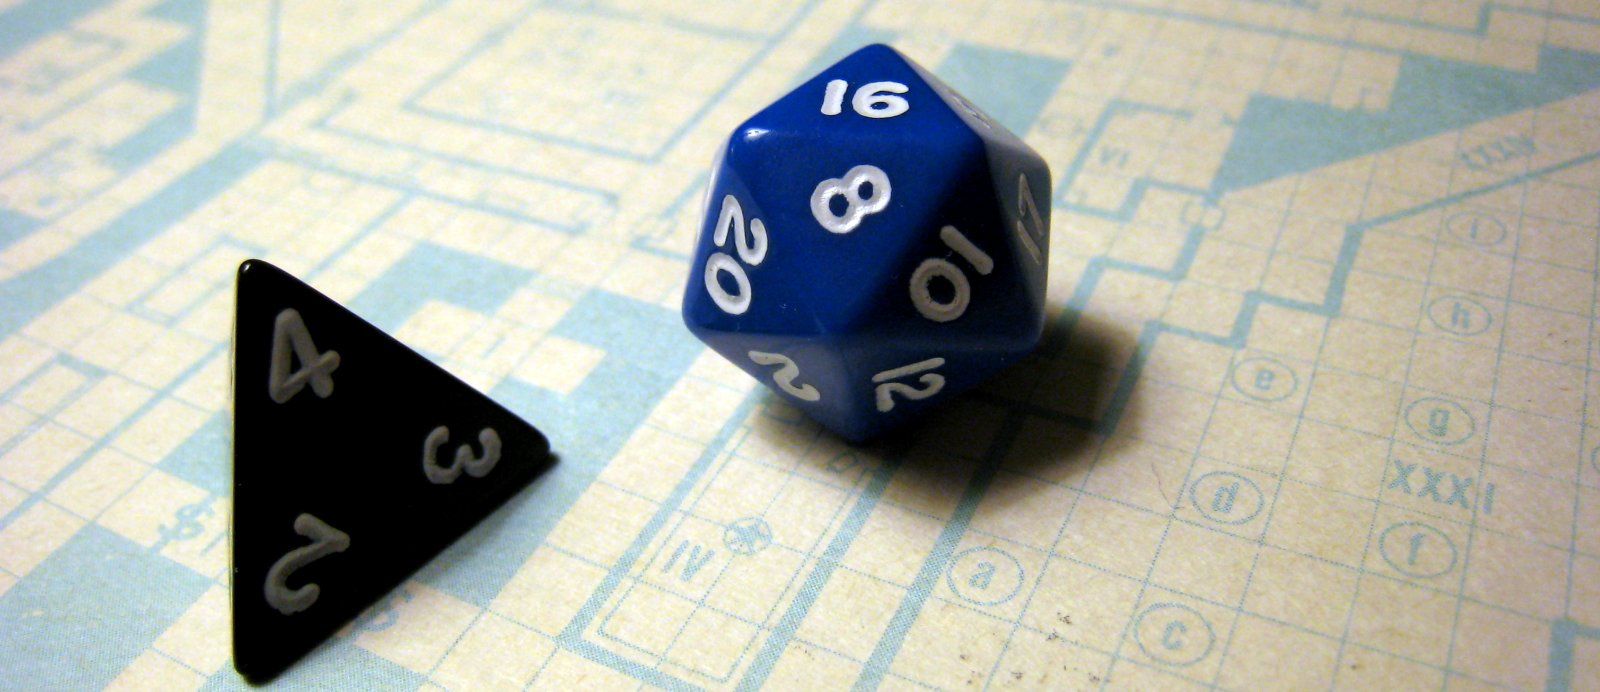 Can the DM Cheat in D&D? And Should They?